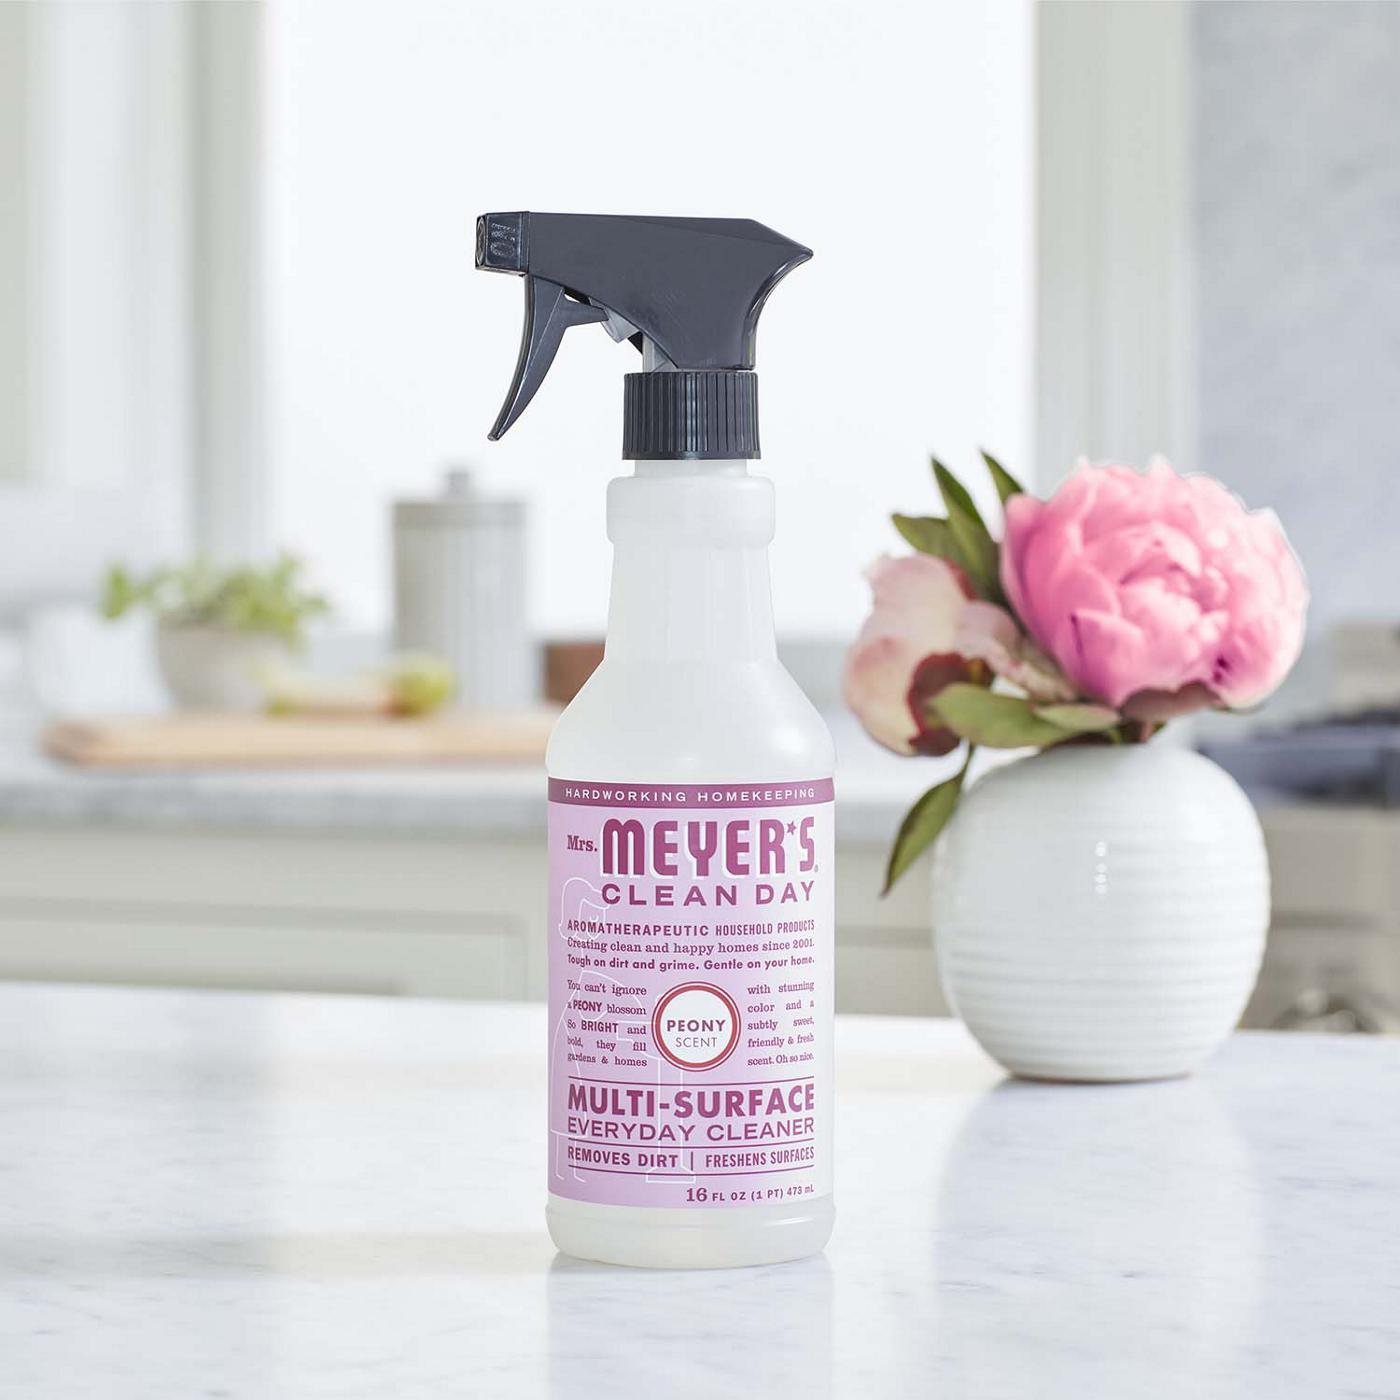 Mrs. Meyer's Clean Day Peony Scent Multi-Surface Everyday Cleaner Spray; image 5 of 6